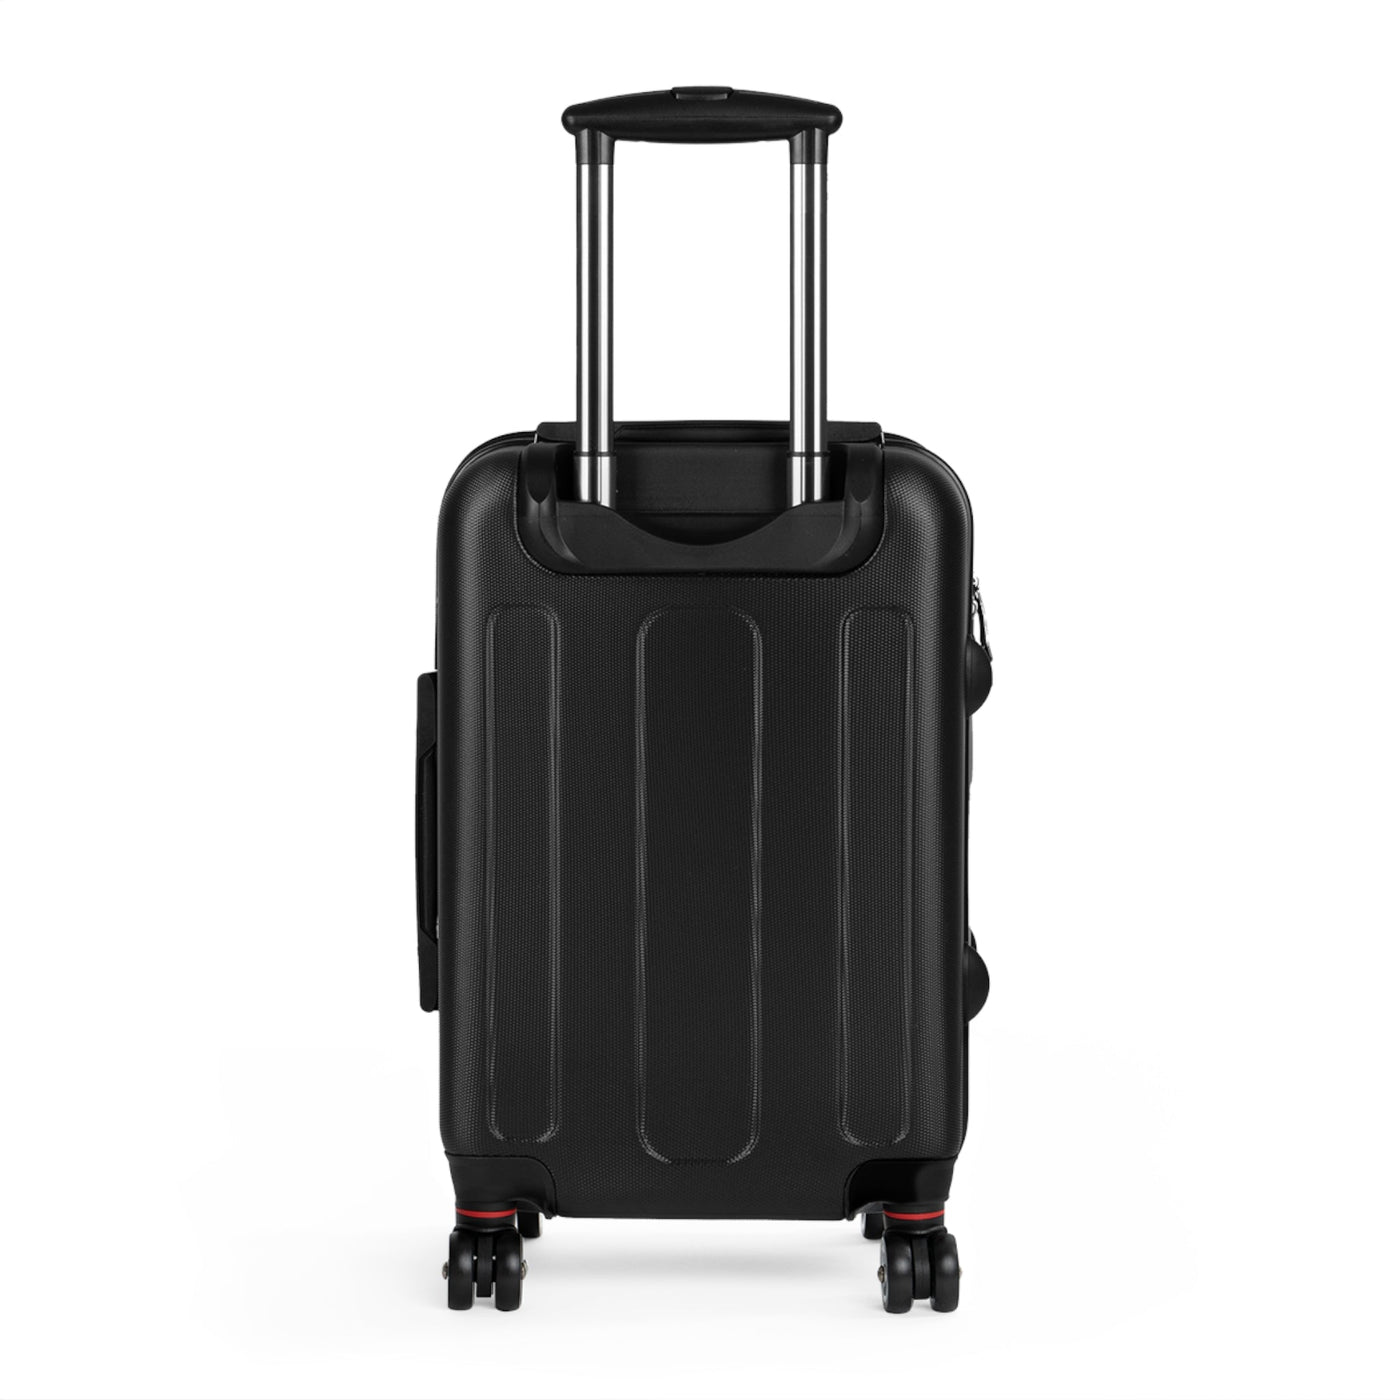 See the World Carry-on Luggage